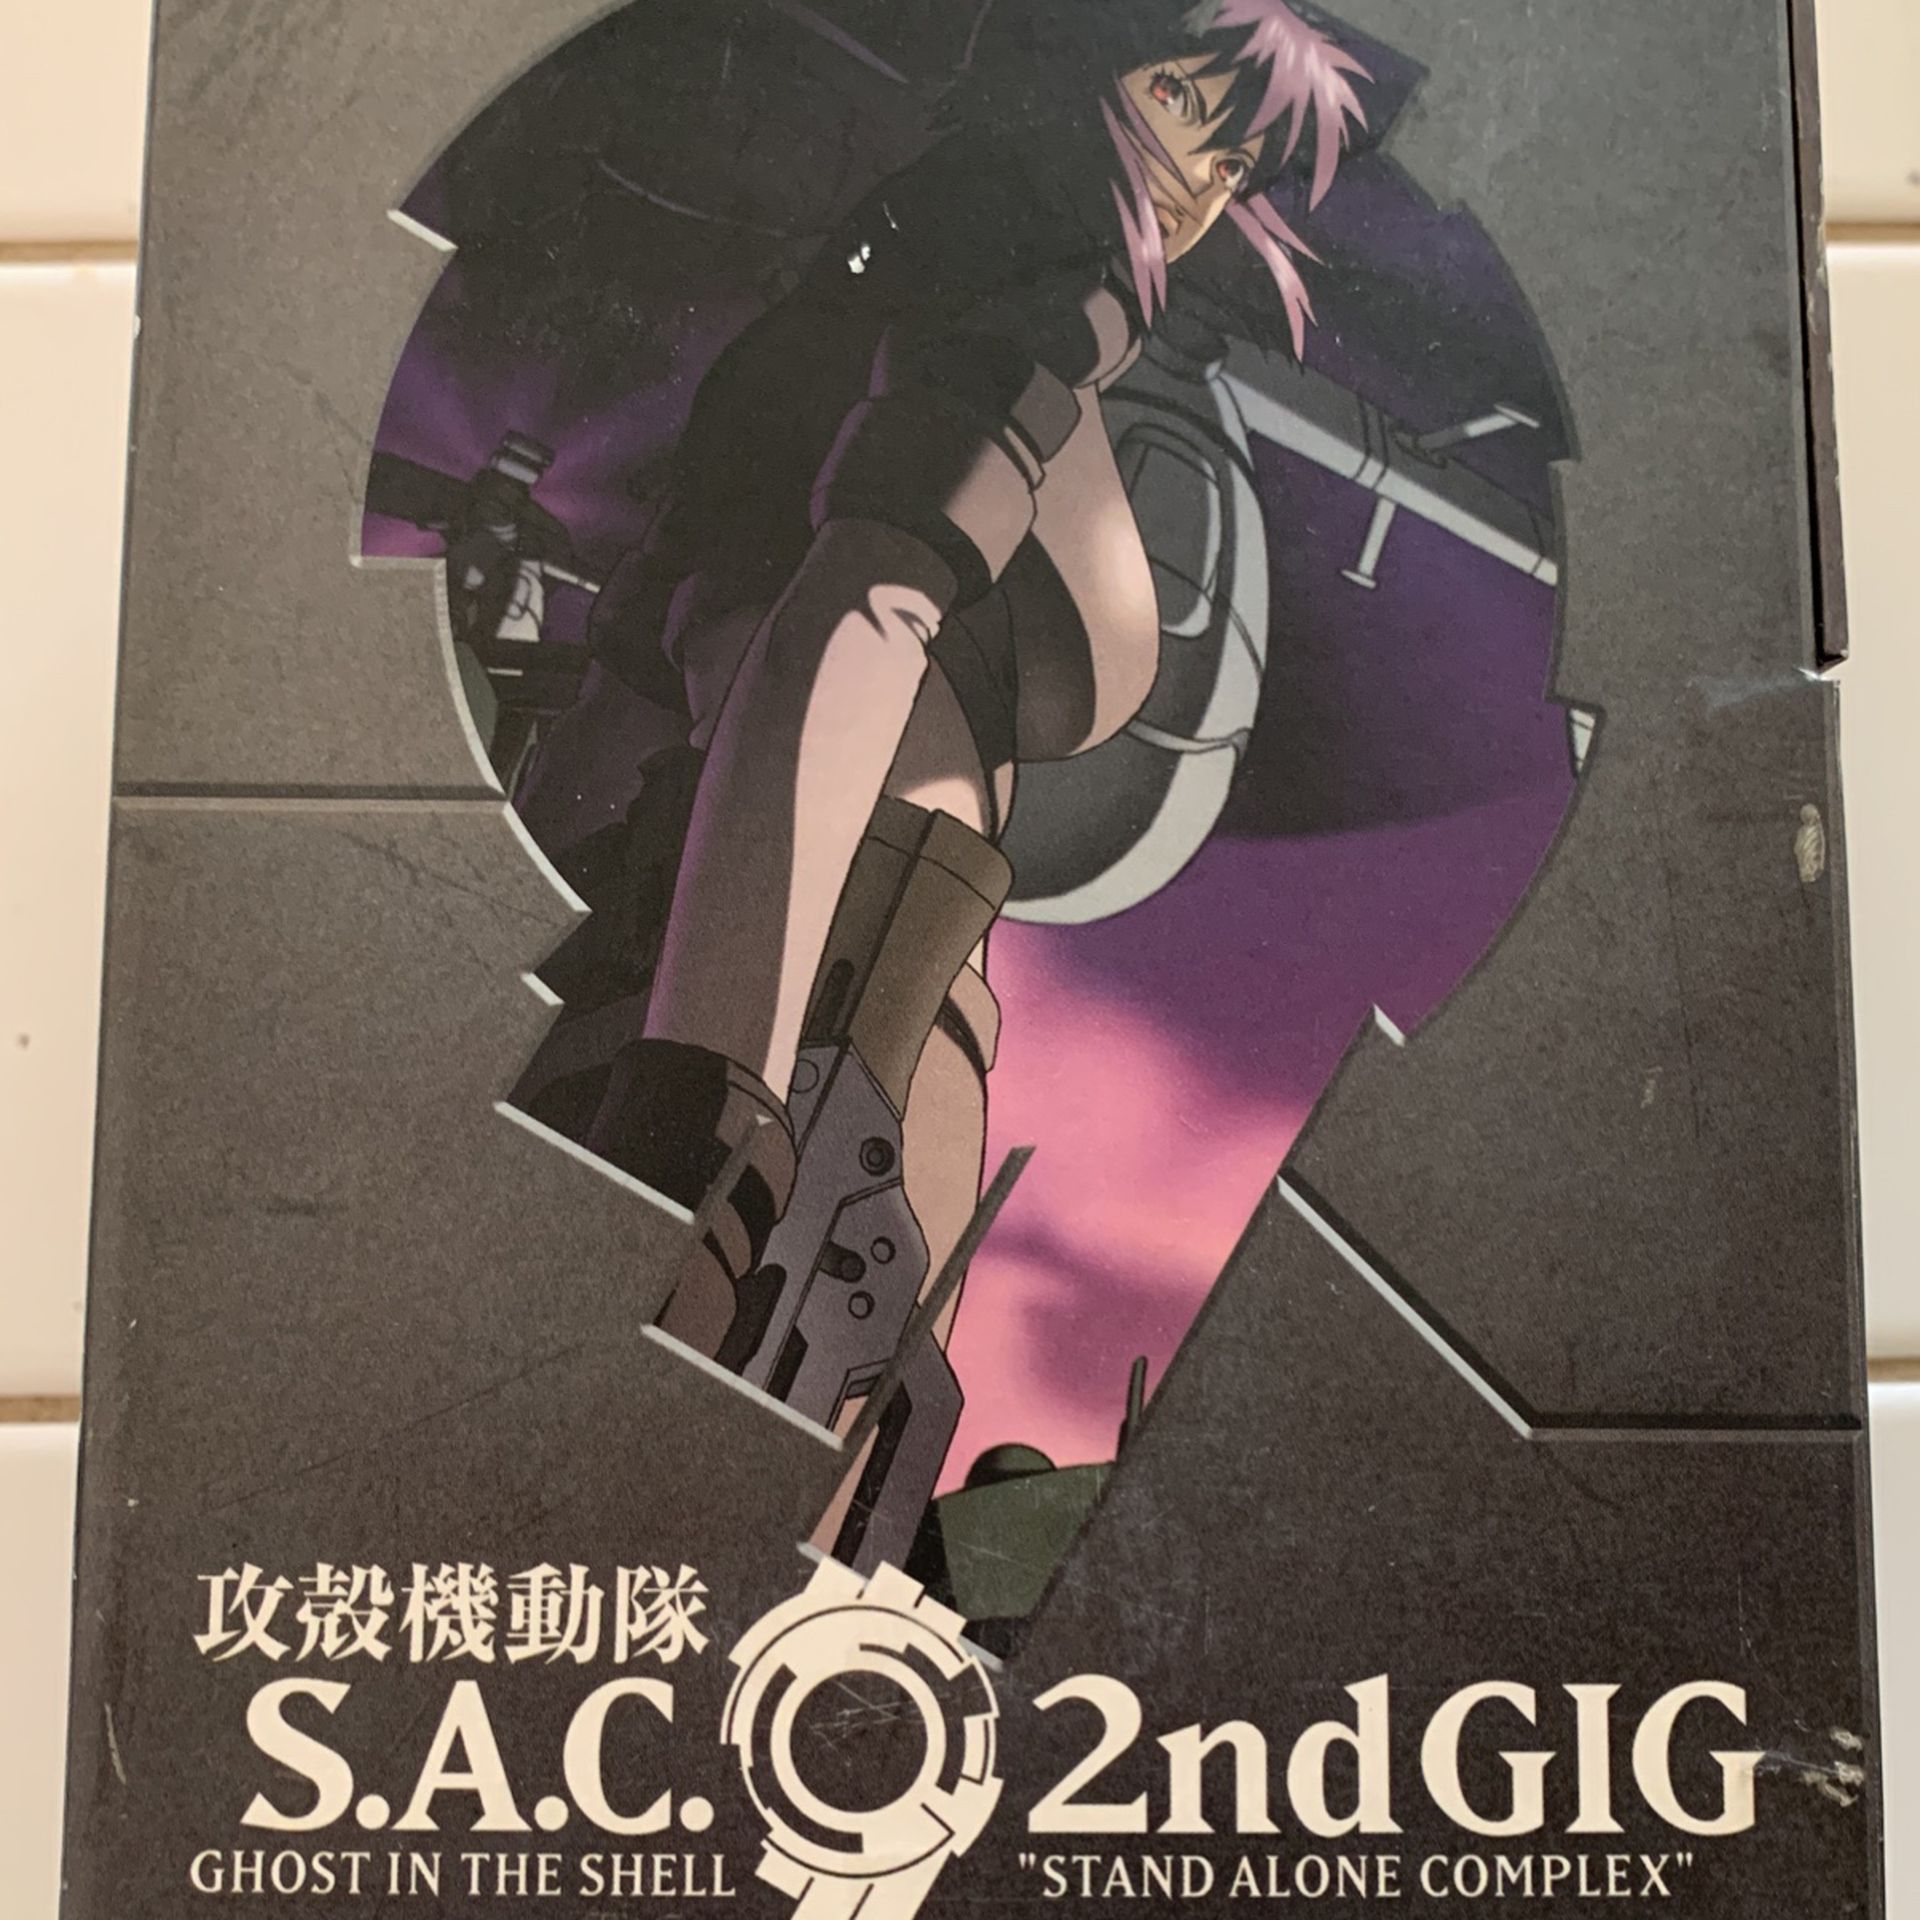 Ghost In The Shell S.A.C. 2nd GIG Anime Complete Box Set DVD’s